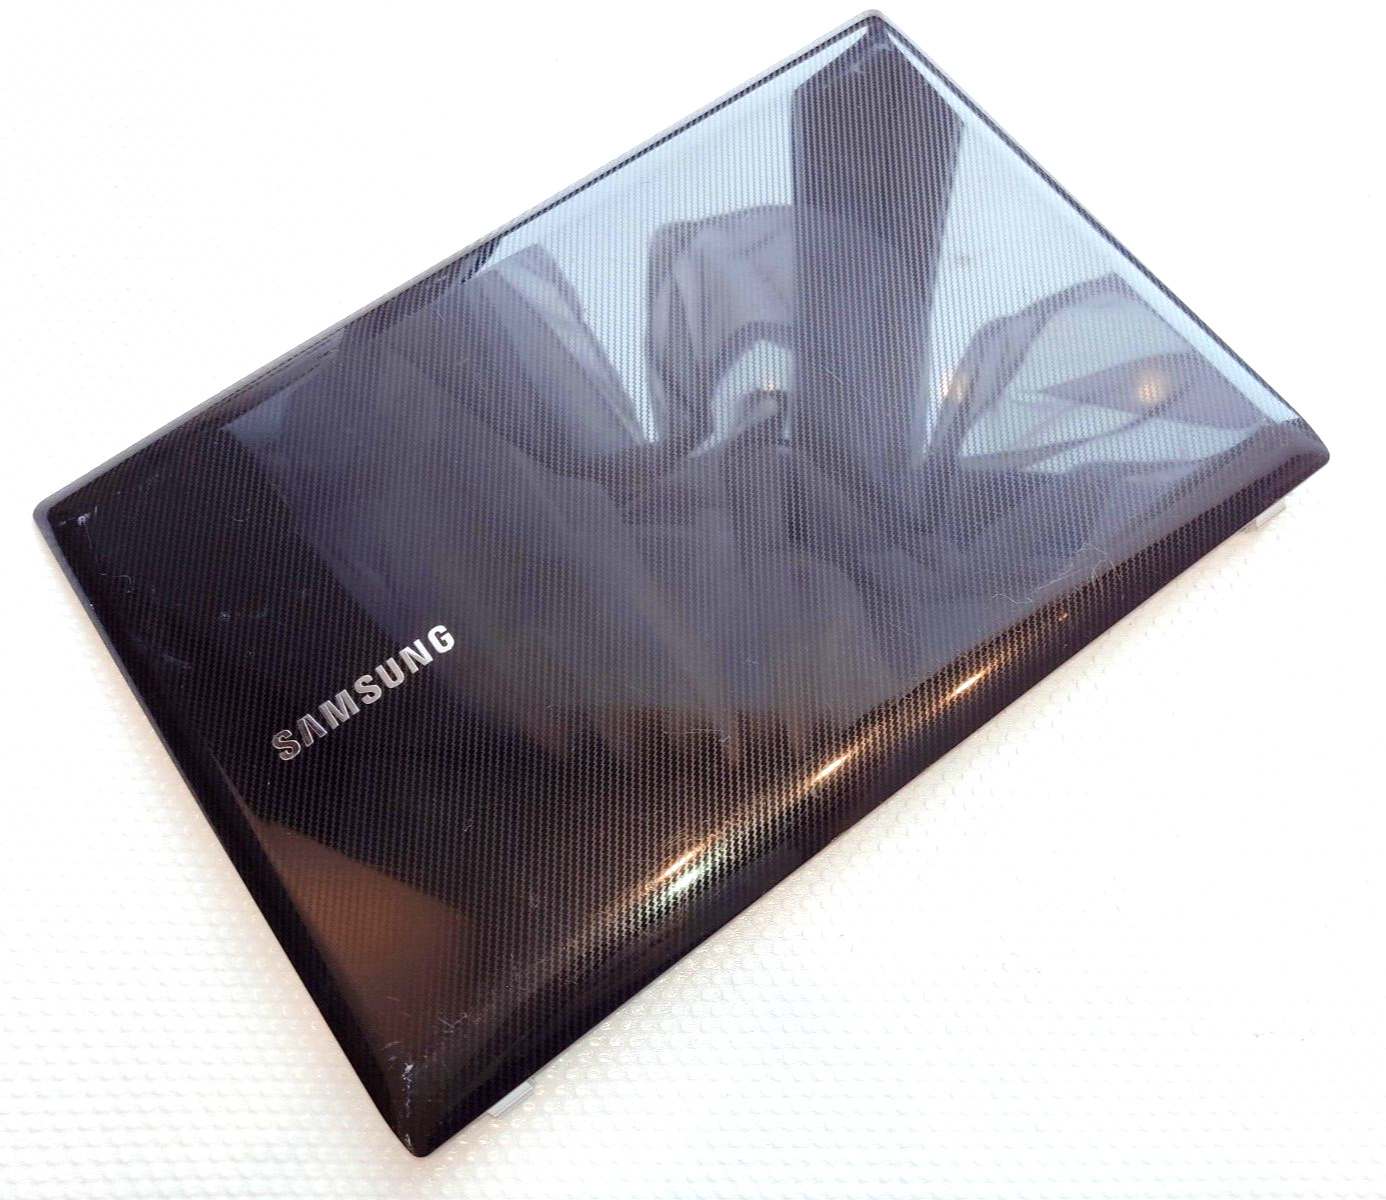 ☆ Samsung NP-Q330 Laptop Series LCD Screen Top Lid Back Cover BA75-02570B Used